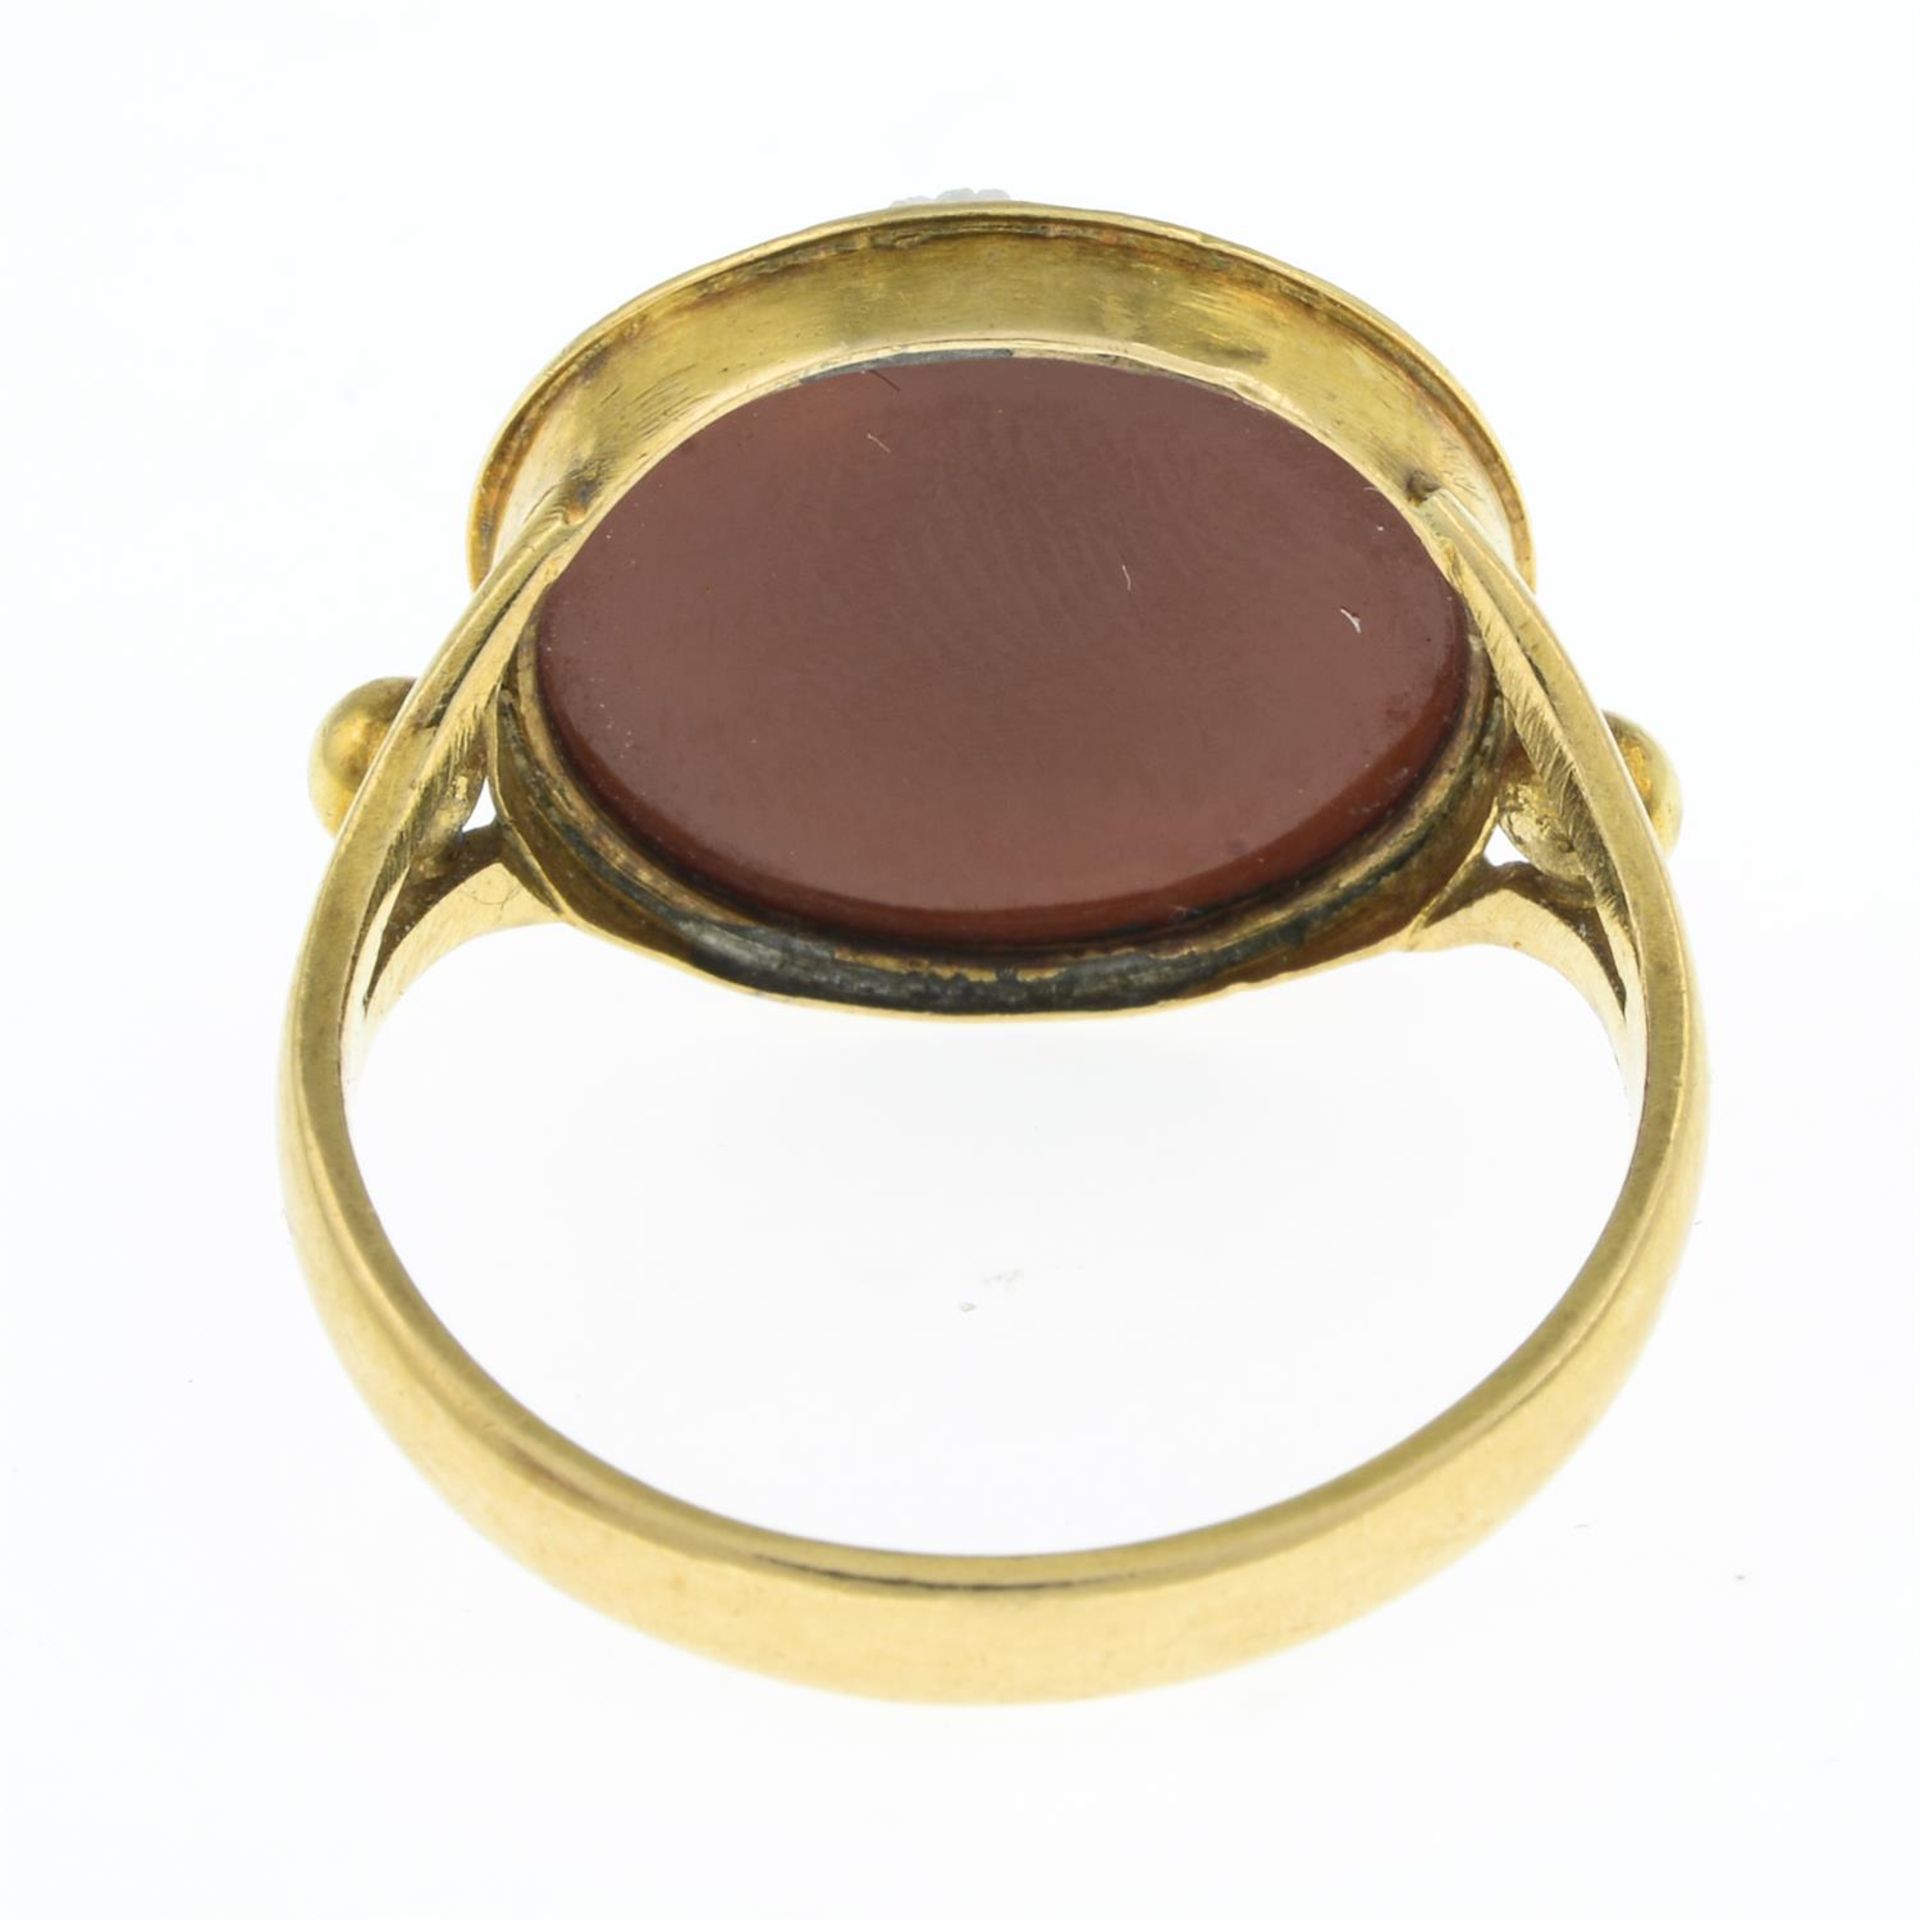 19th century gold agate cameo ring - Image 2 of 2